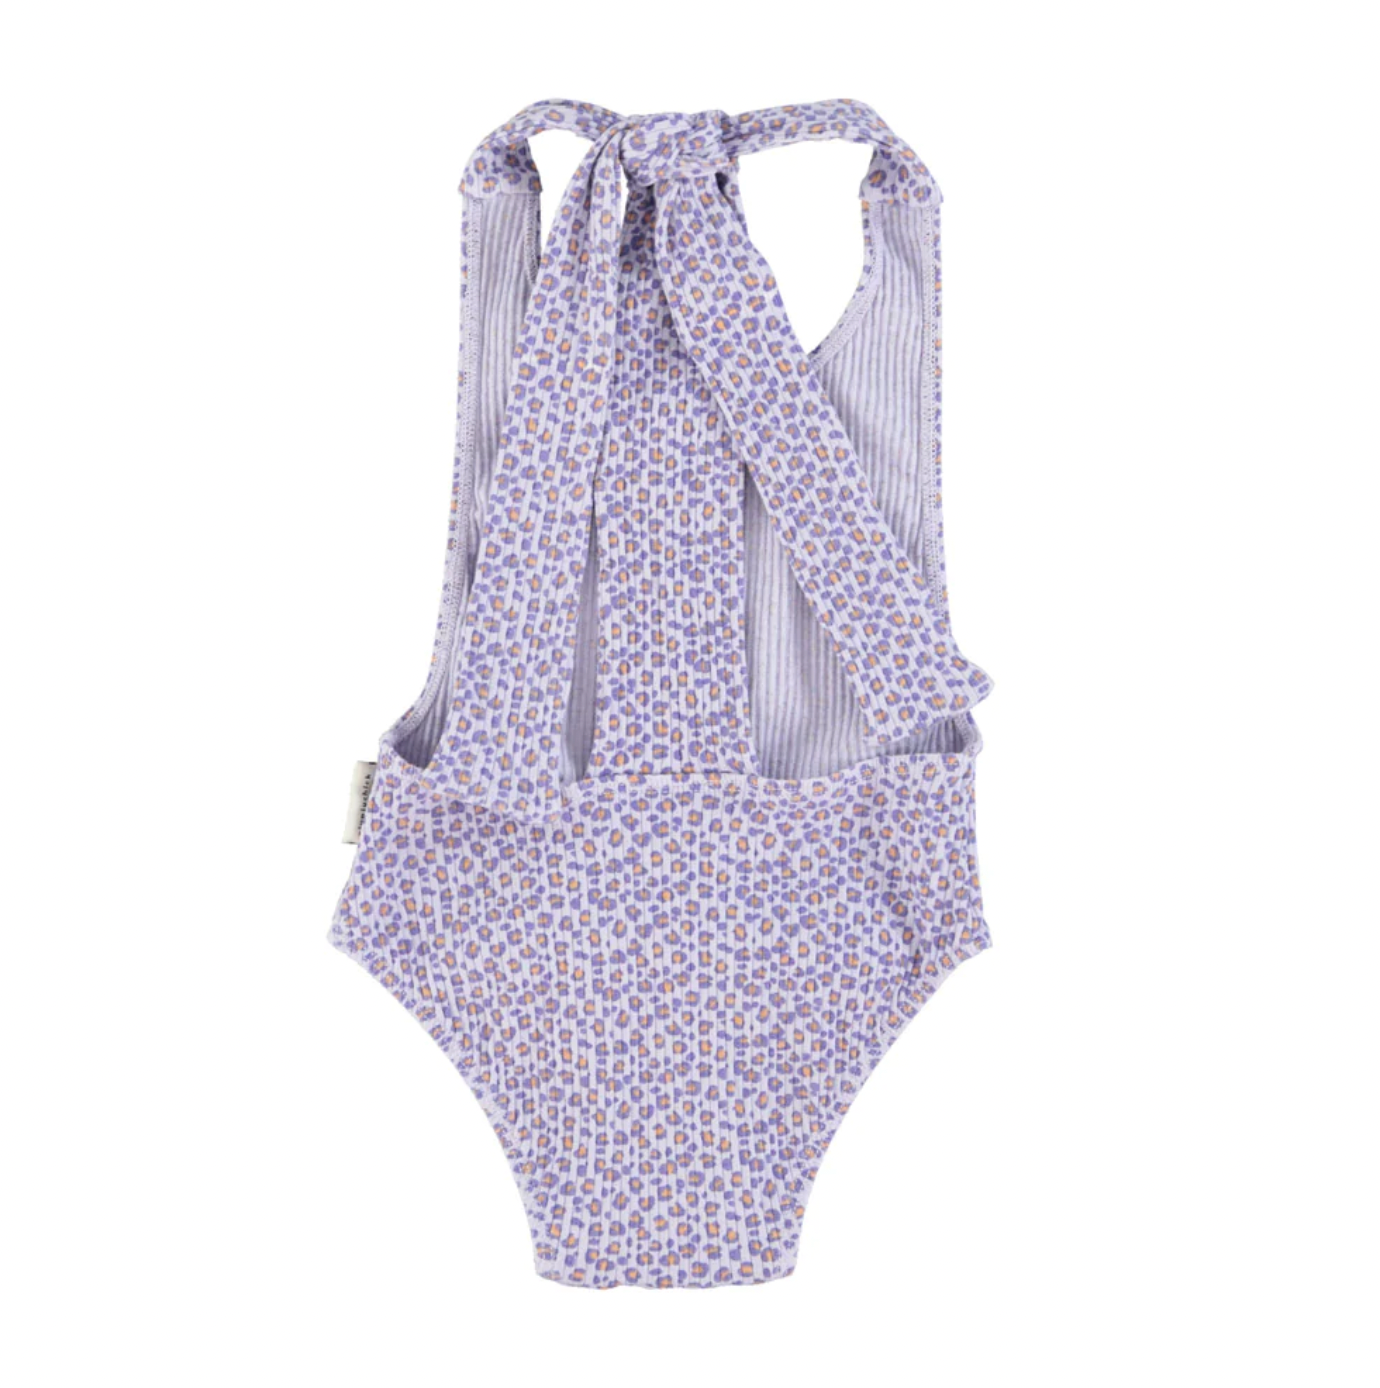 Swimsuit - Bow back, lavender with animal print